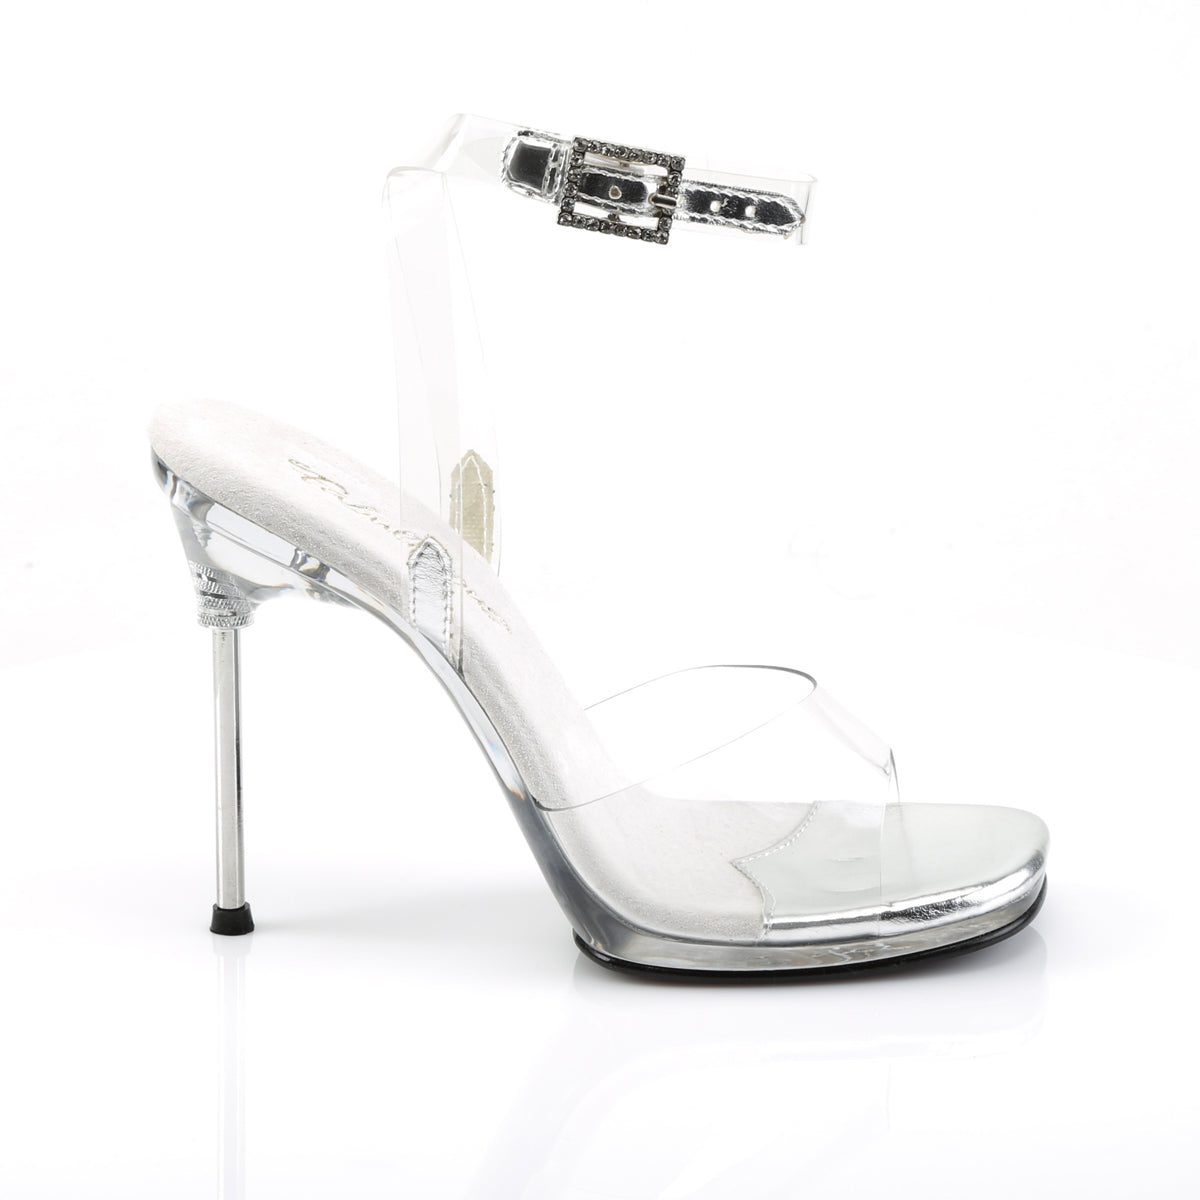 CHIC-06 Fabulicious 4.5 Inch Heel Clear Posing Shoes-Fabulicious- Sexy Shoes Fetish Heels